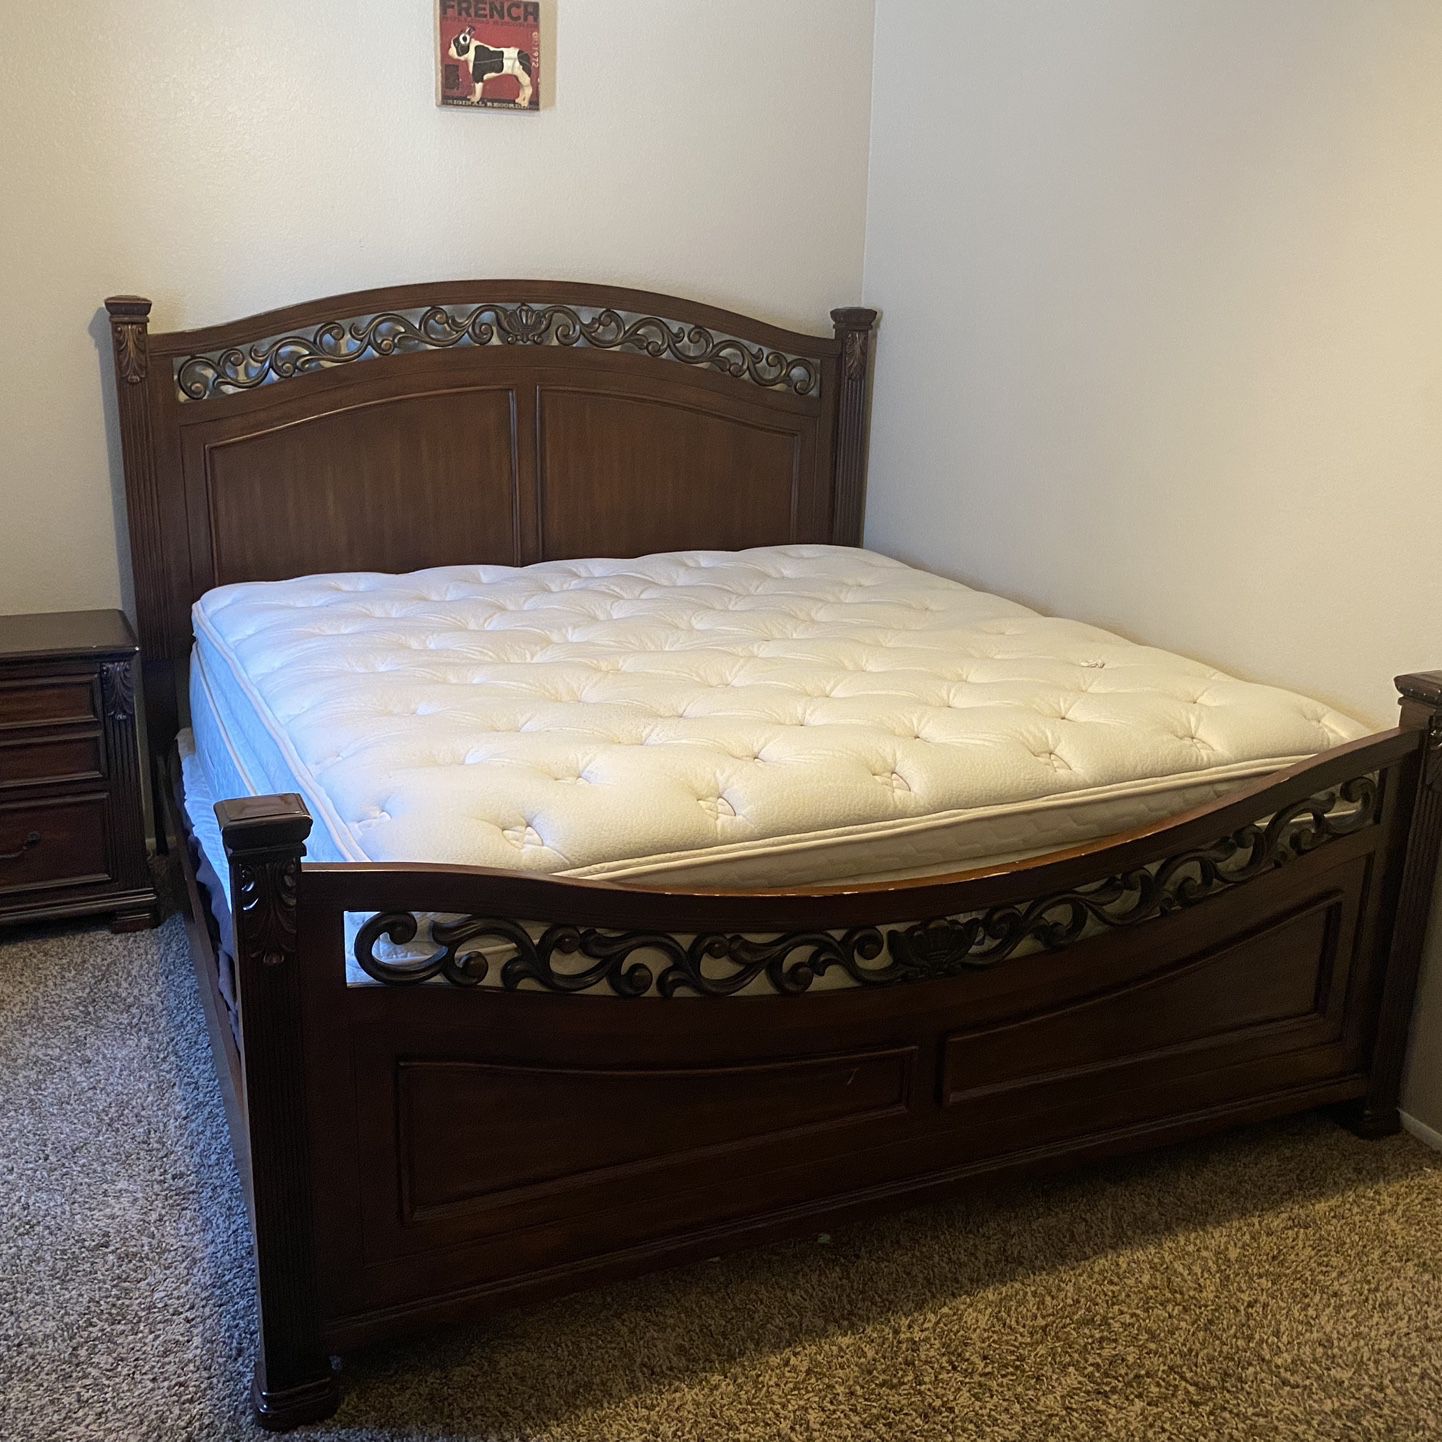 King Size Bedroom Set from JCPenny🔥includes Sealy Mattress, Nightstand, 6 Drawer Dresser, And 2 Bed Side Tables.